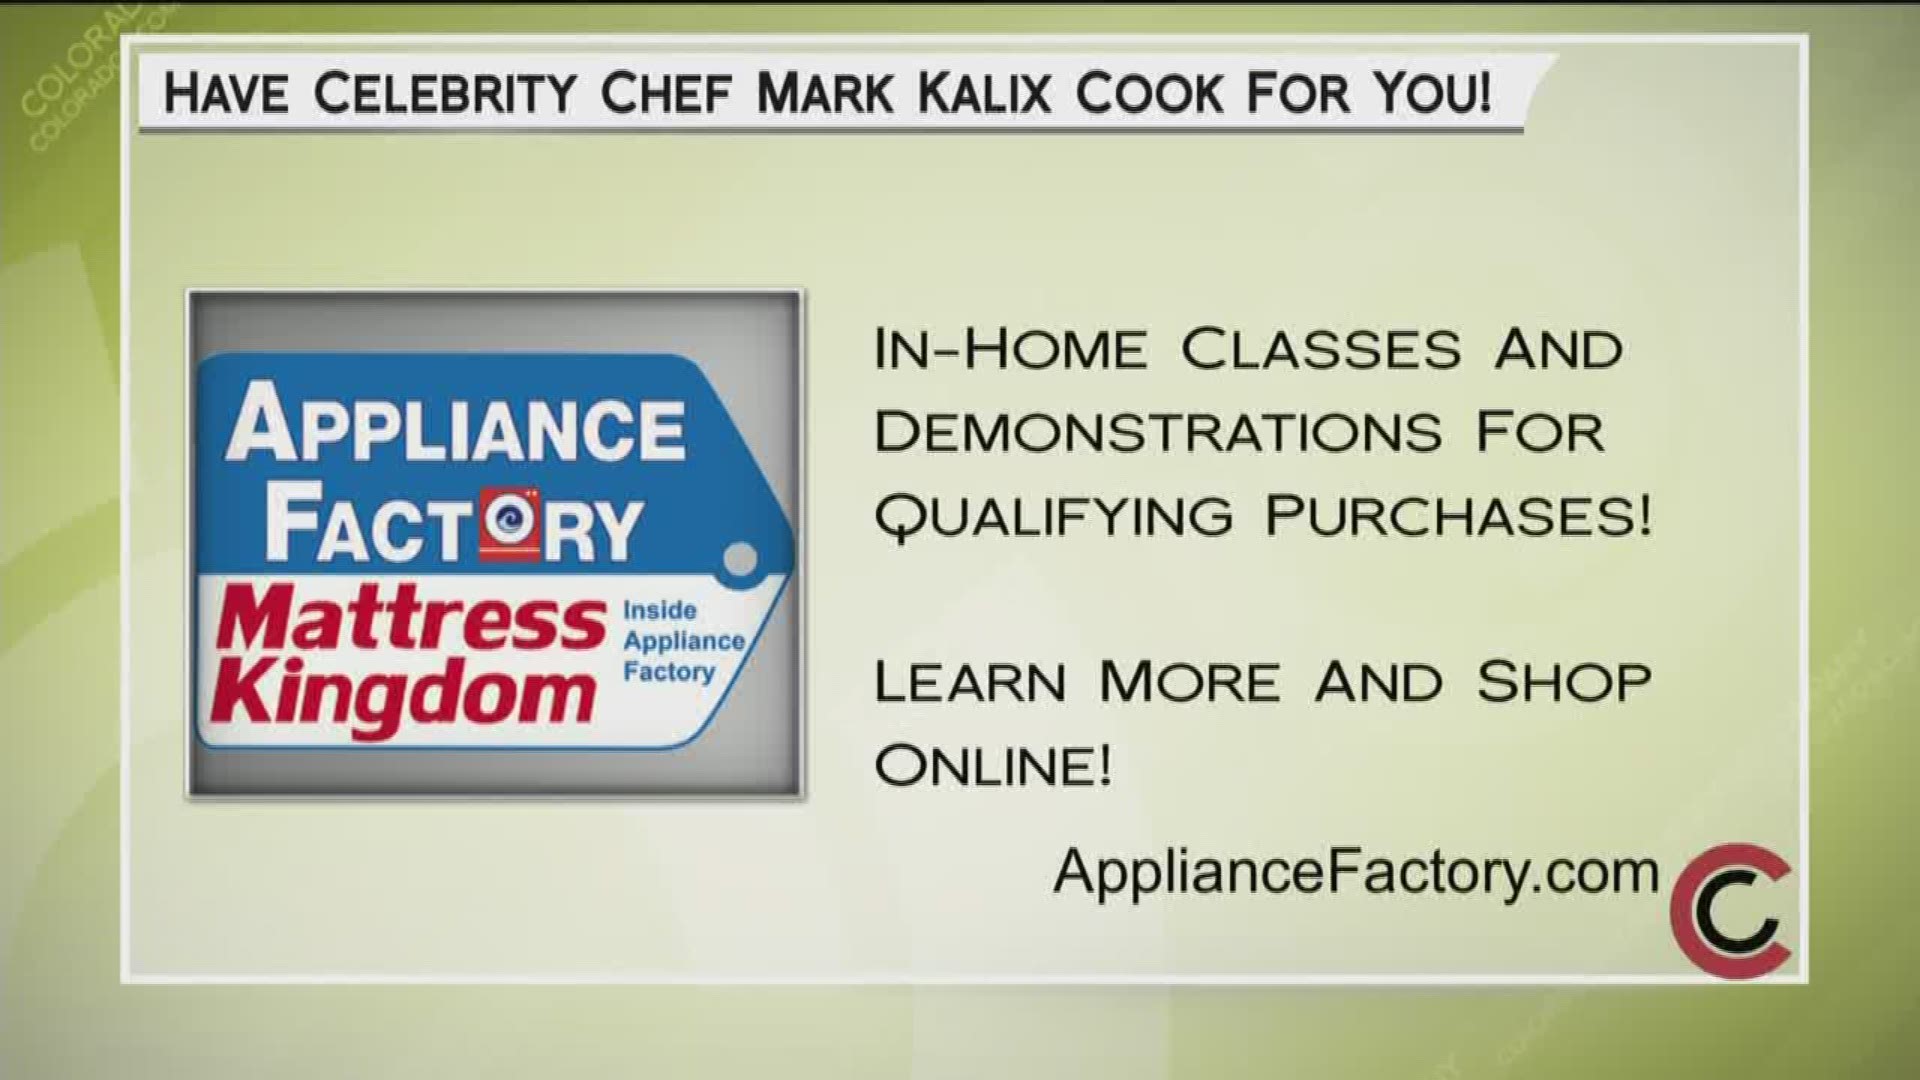 Chef Mark Kalix offers in-house cooking classes  with qualifying purchases. Check out thousands of appliances and Black Friday pricing 40-80% off.